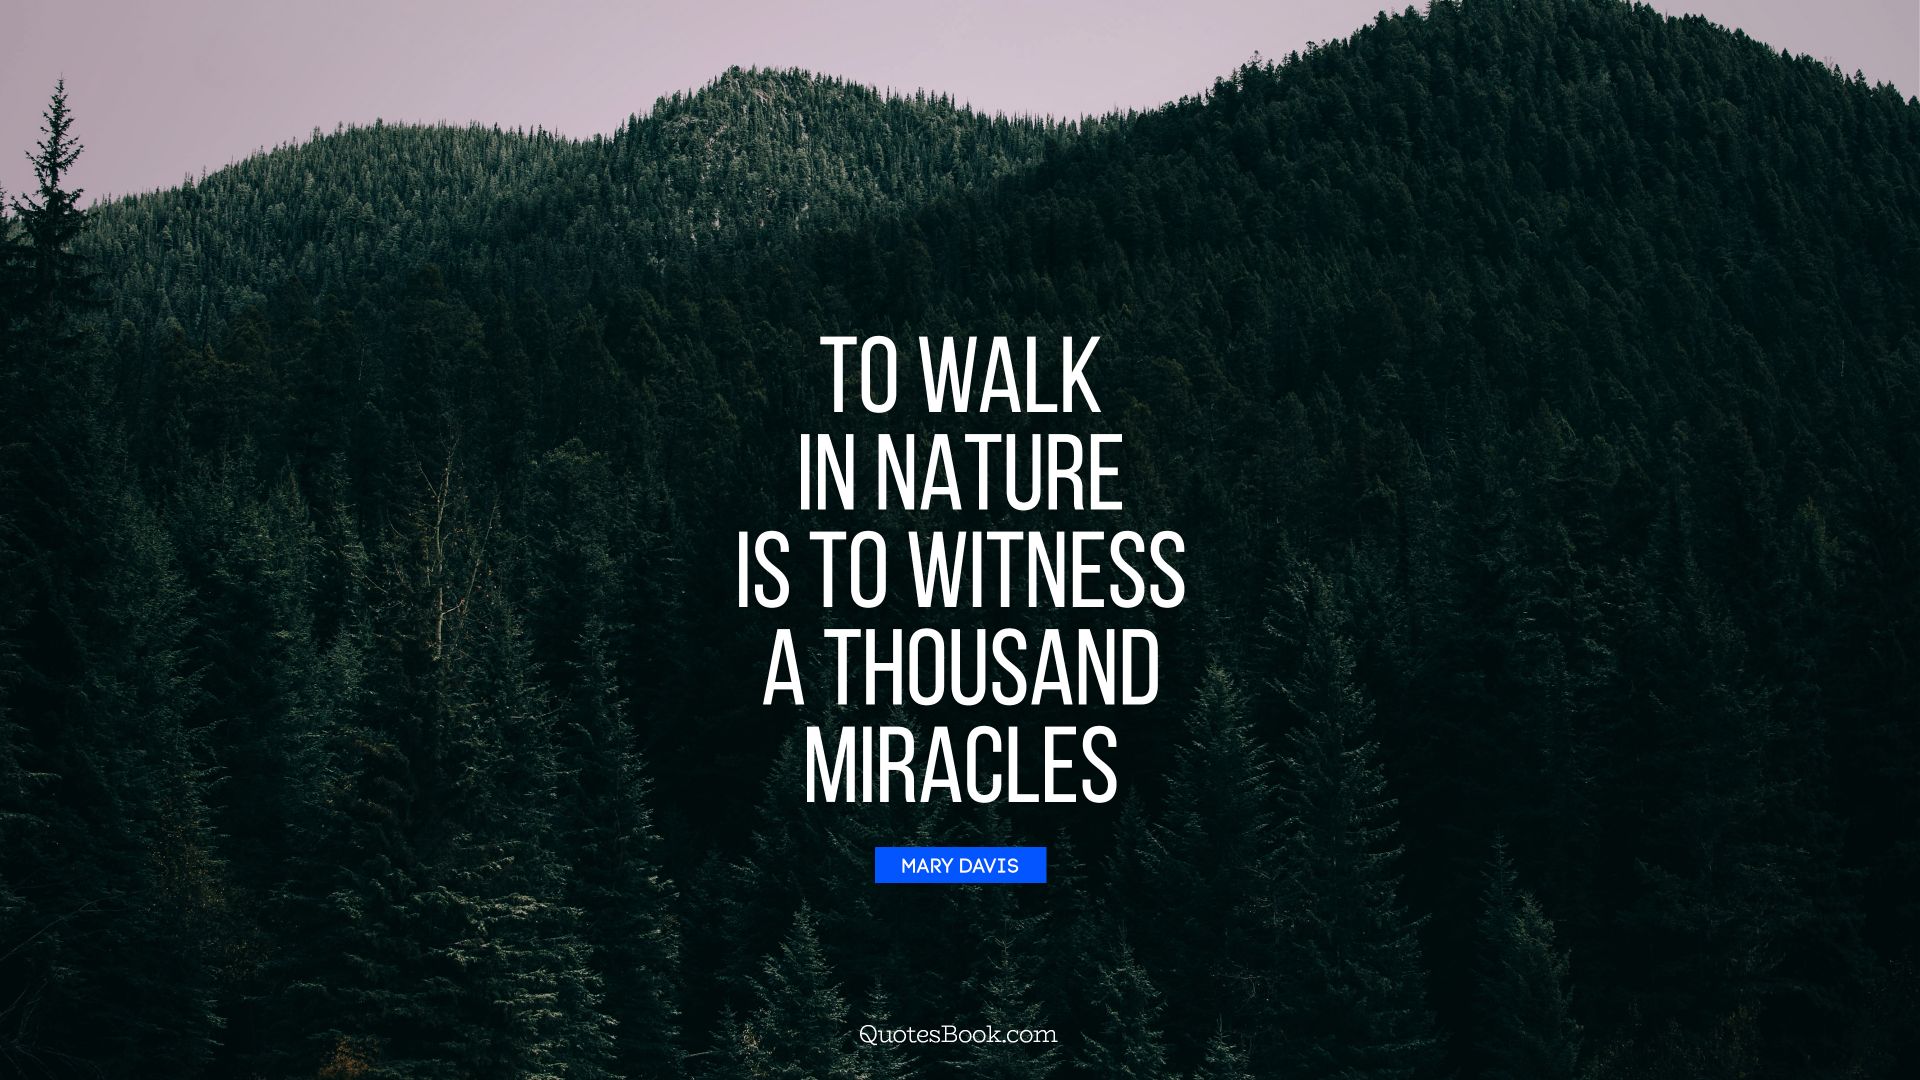 To walk in nature is to witness a thousand miracles. - Quote by Mary Davis